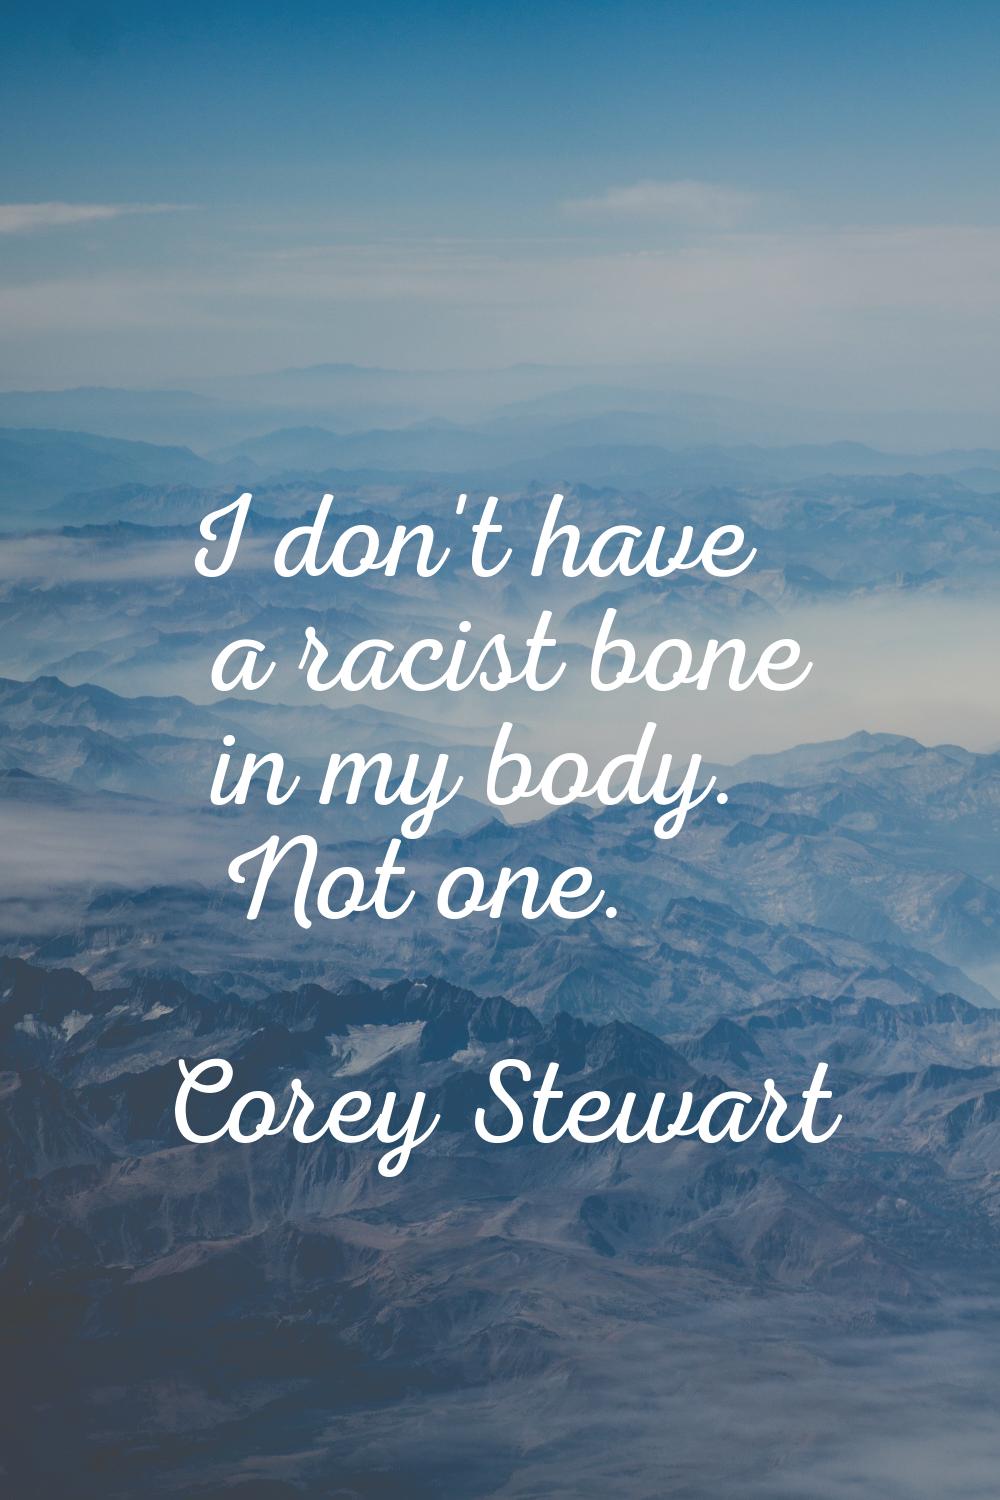 I don't have a racist bone in my body. Not one.